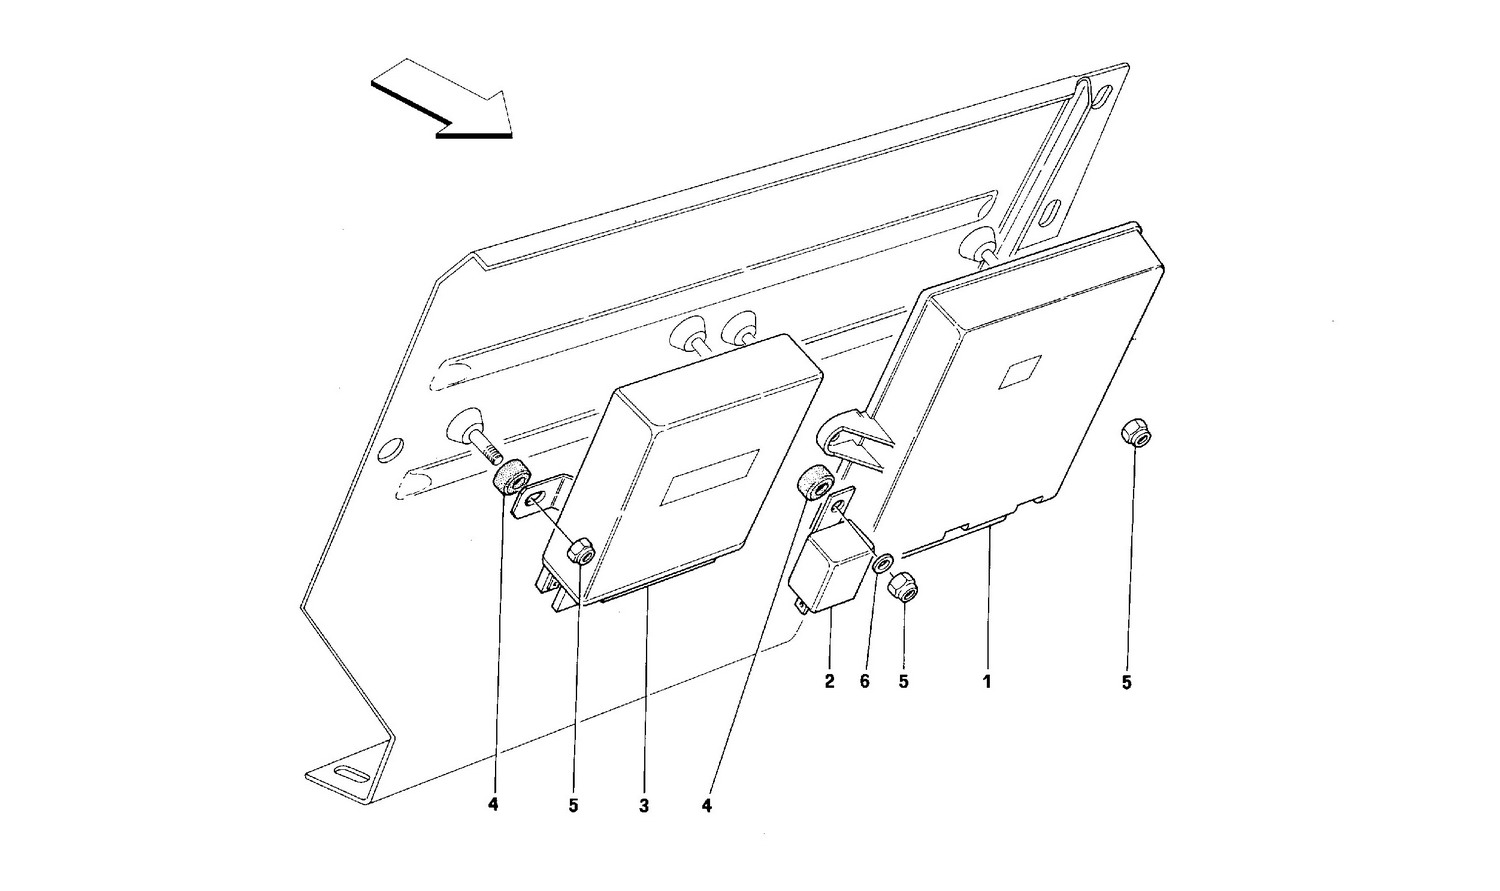 Schematic: Switching Units And Devices For Foot Rest Plate